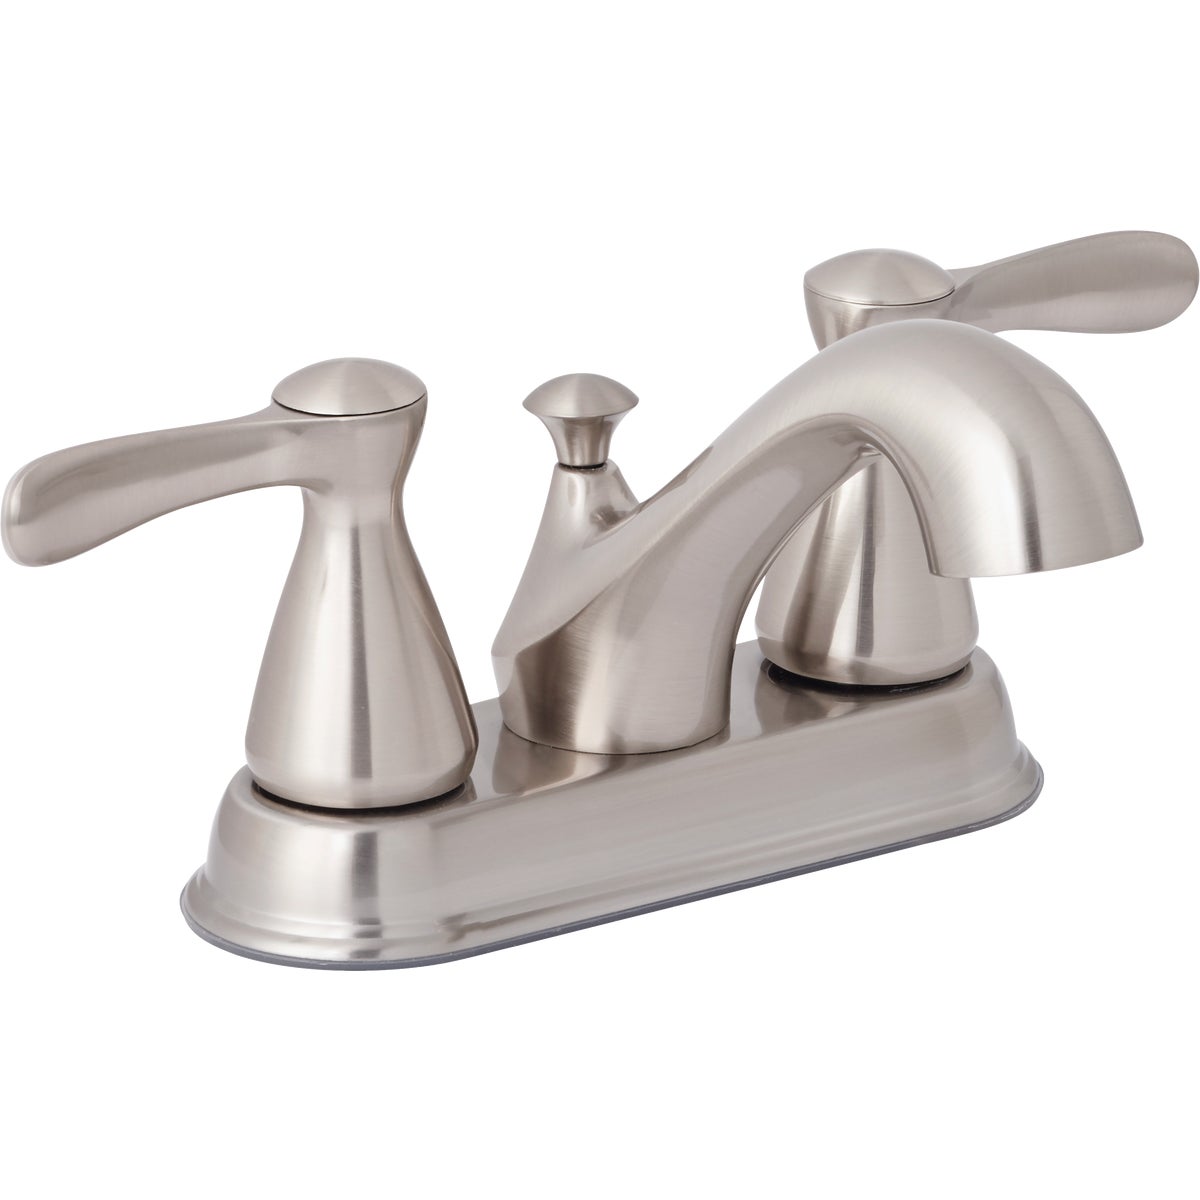 Item 404287, Two metal handle traditional style lavatory faucet with pop-up. 1.